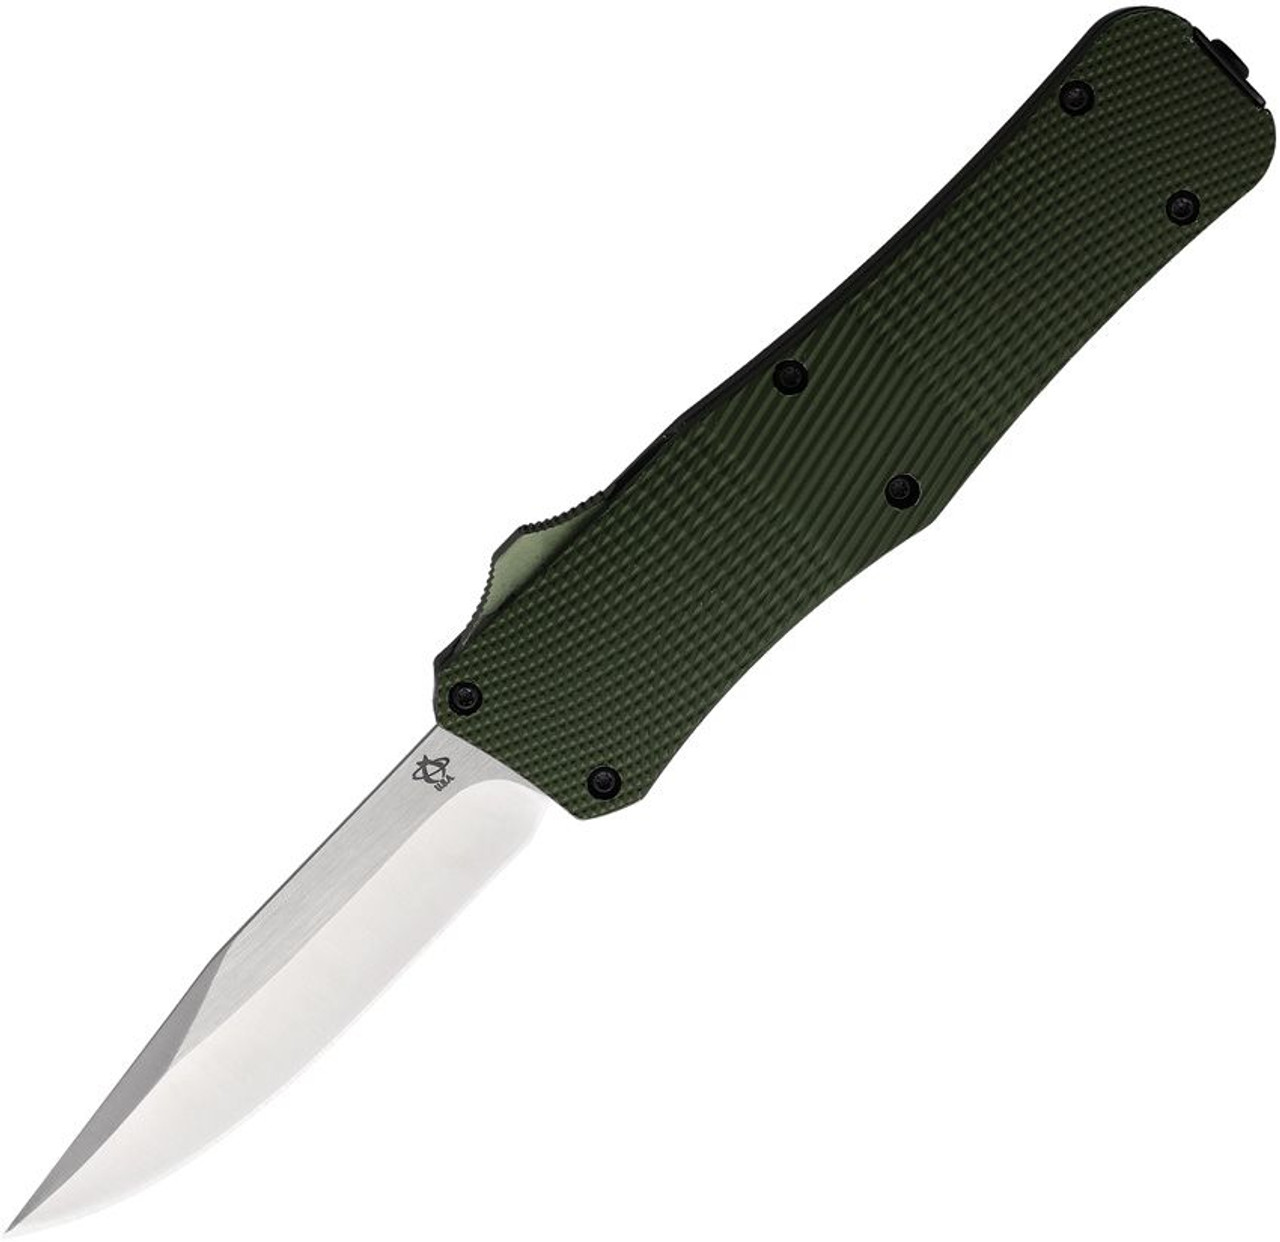 Mantis Knives Out the Front (MANOTF815) 3.25" Satin Finished 440C Drop Point Plain Blade, Green Checkered Aluminum Handle